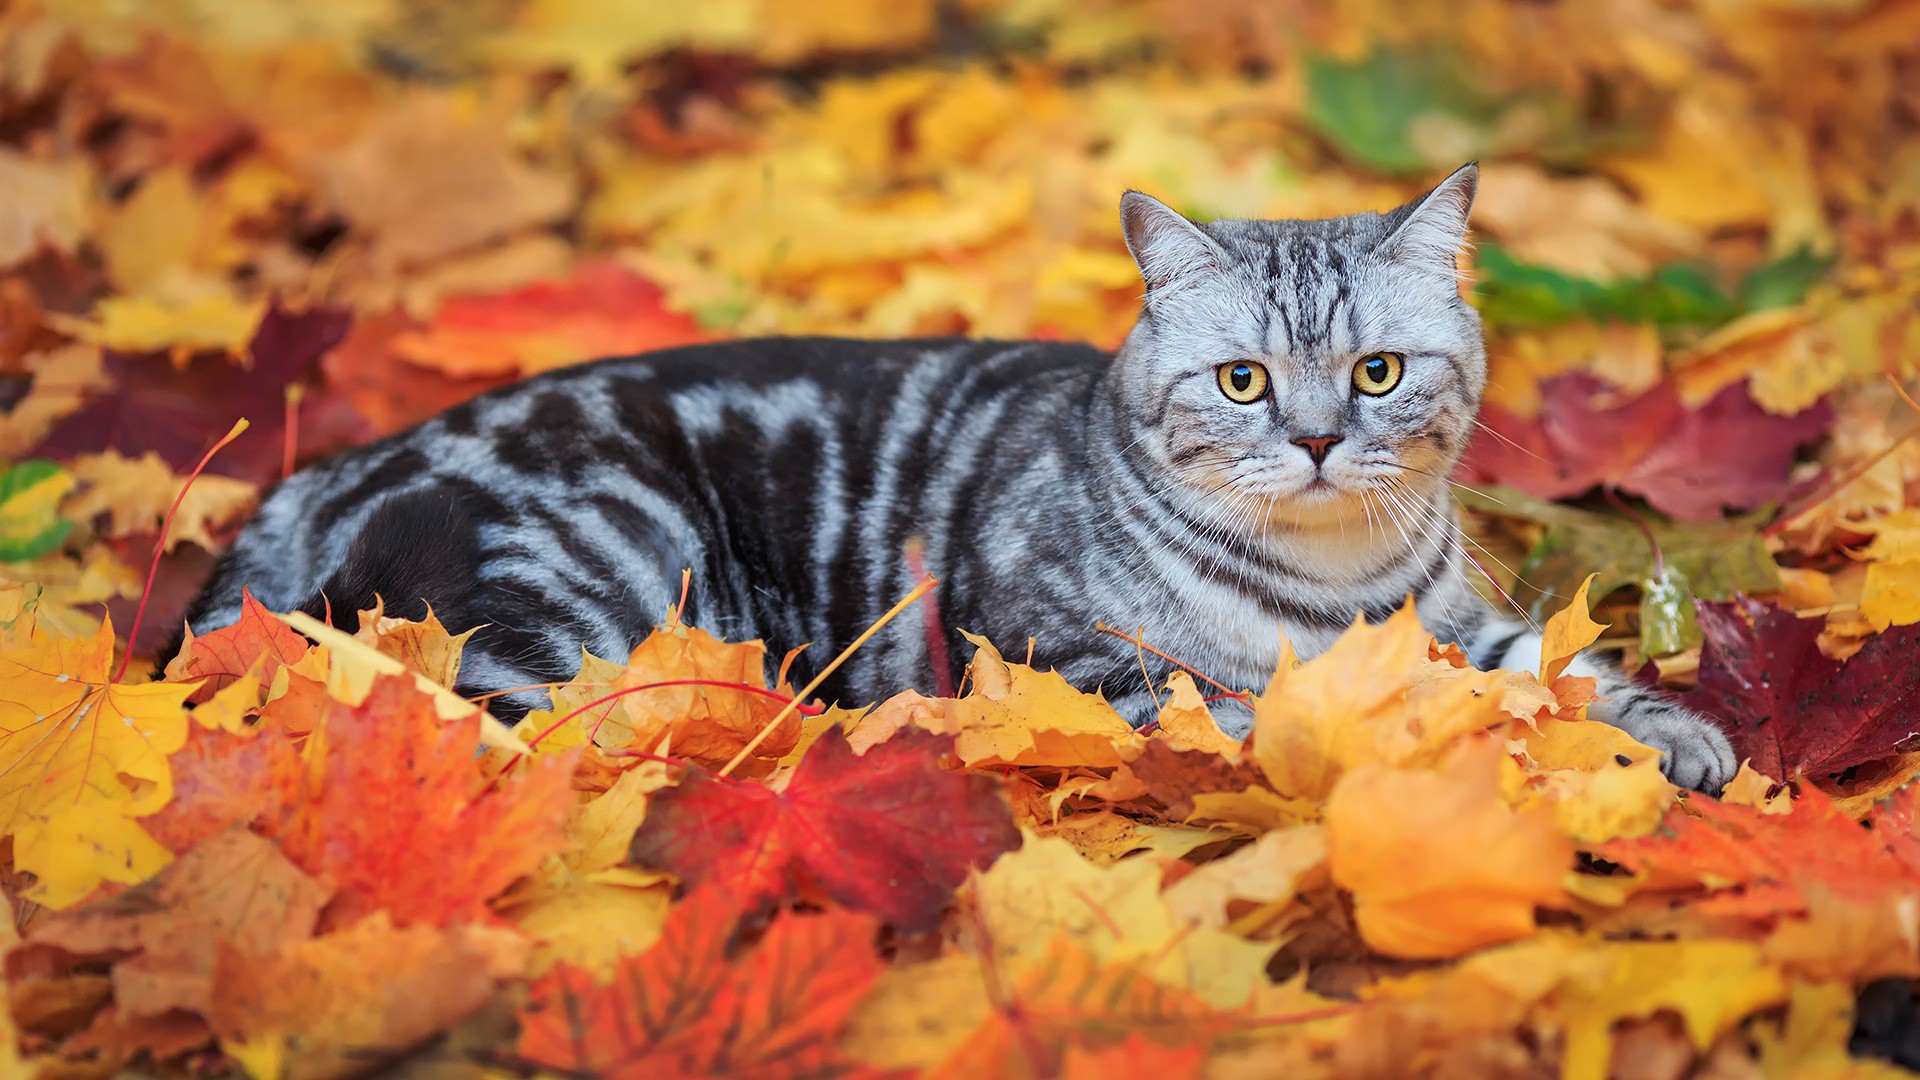 General 1920x1080 leaves fall animals cats mammals fallen leaves outdoors